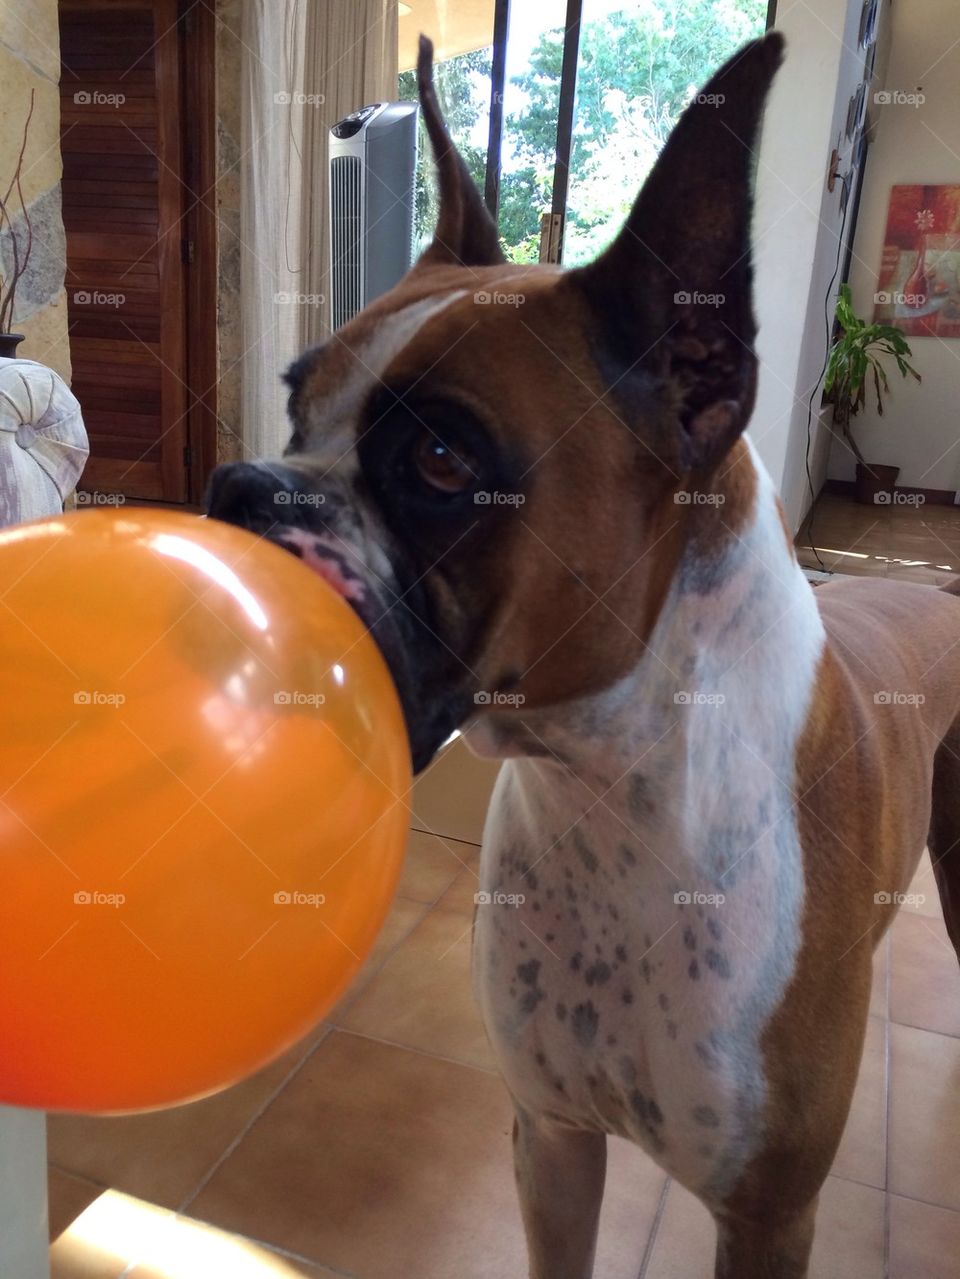 Dog playing with a balloon 